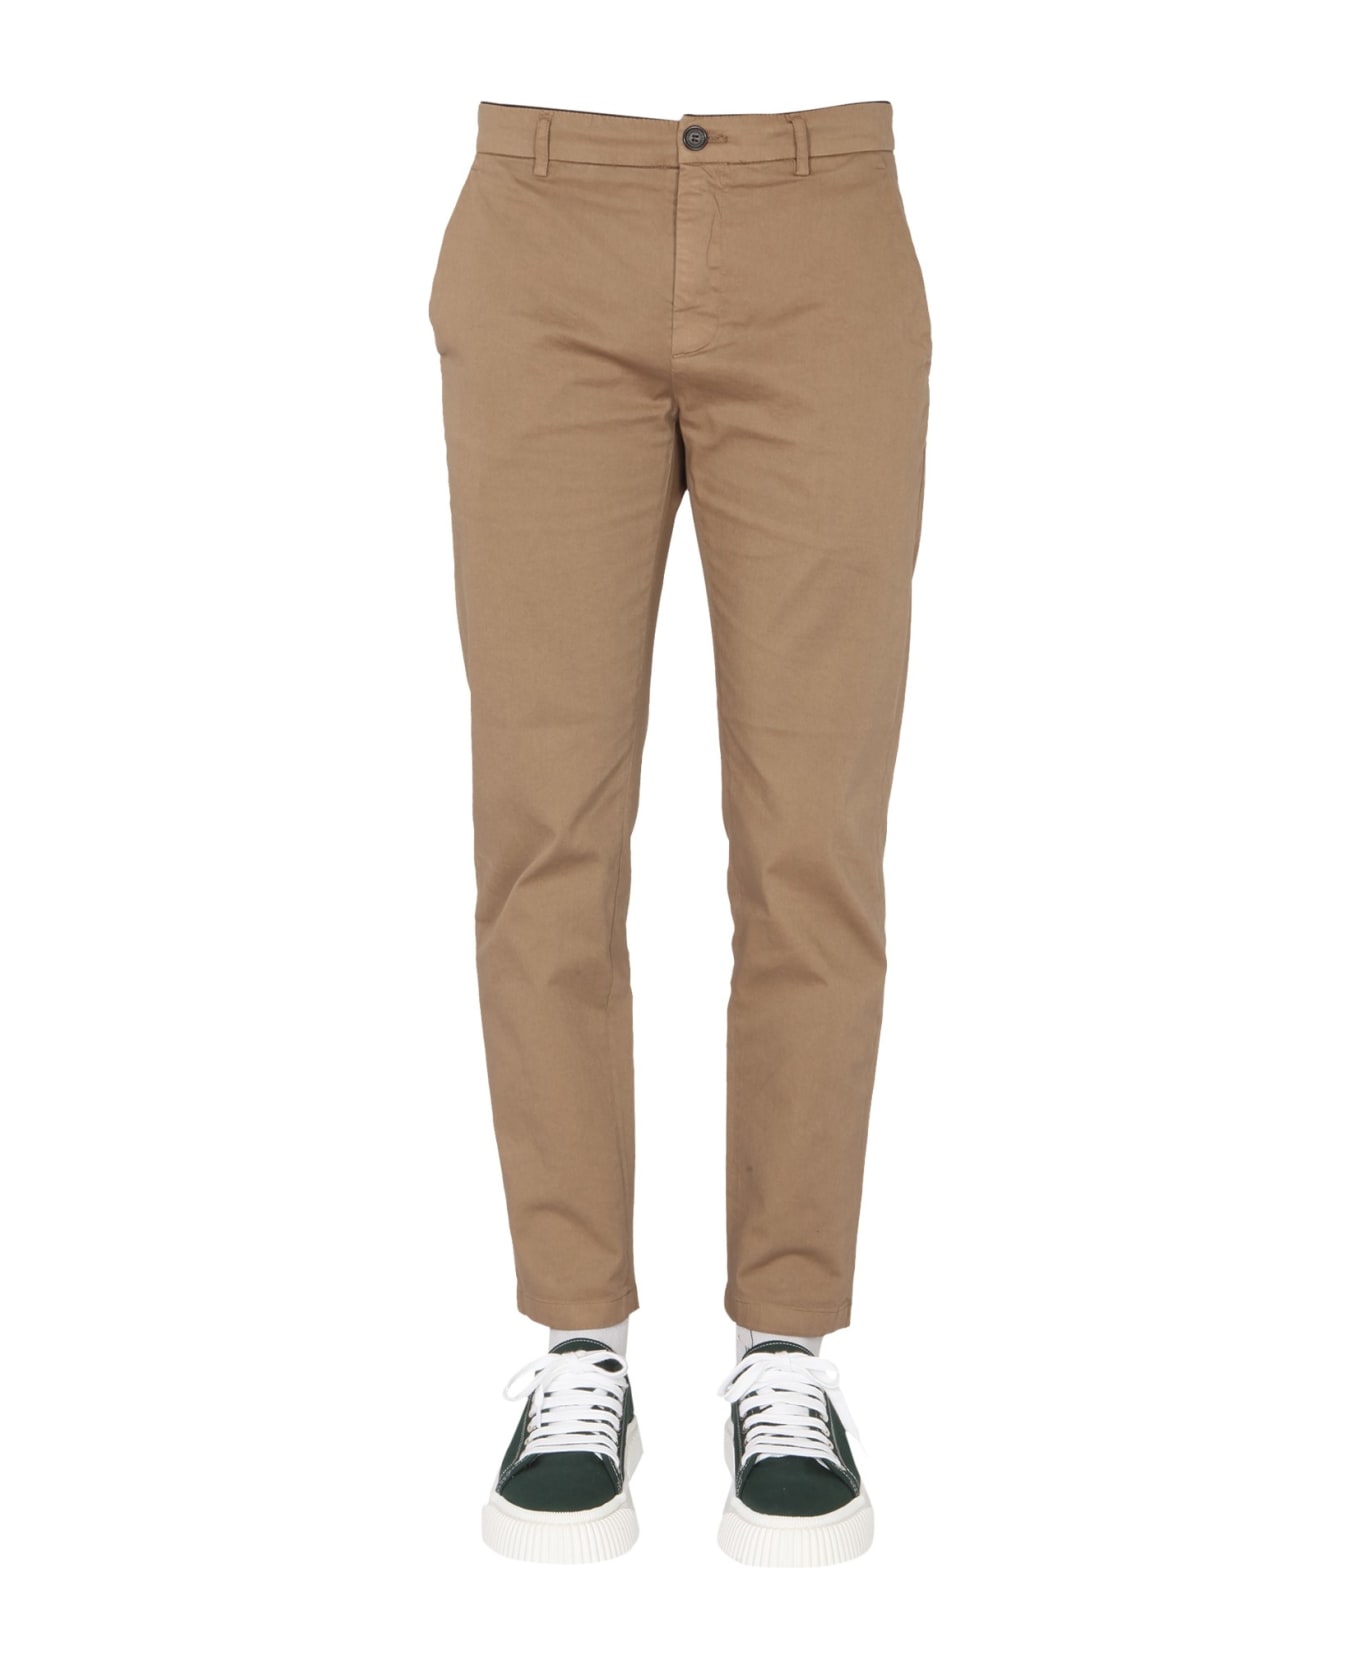 Department Five Prince Trousers - MARRONE